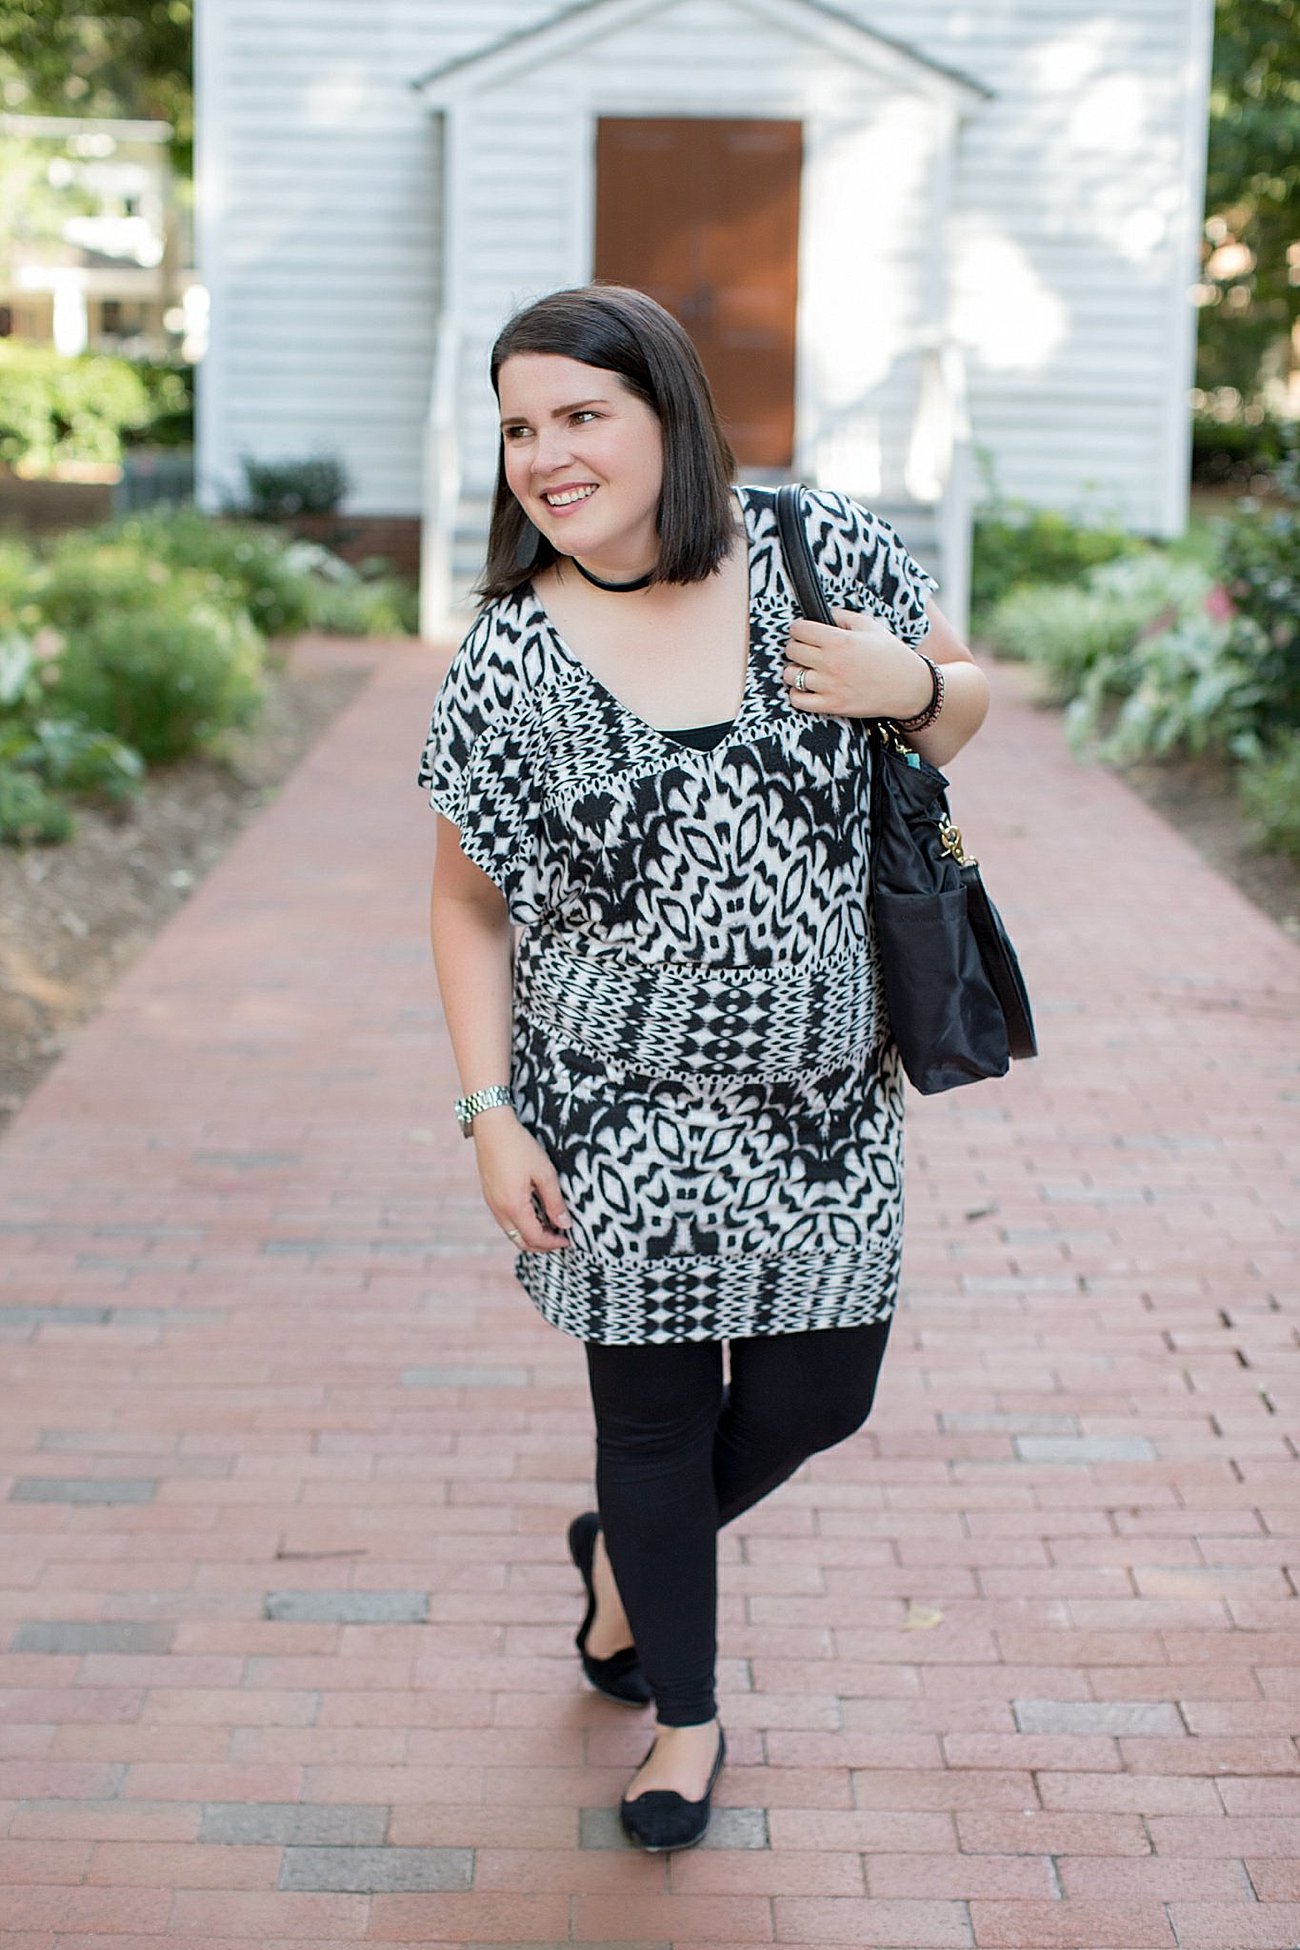 Threads for Thought "Mia Dress", LulaRoe black leggings, Lily Jade diaper bag, Nickel & Suede choker, Nickel & Suede earrings, Darzah stitched leather cuff | ethical fashion blogger, north carolina fashion blogger (8)